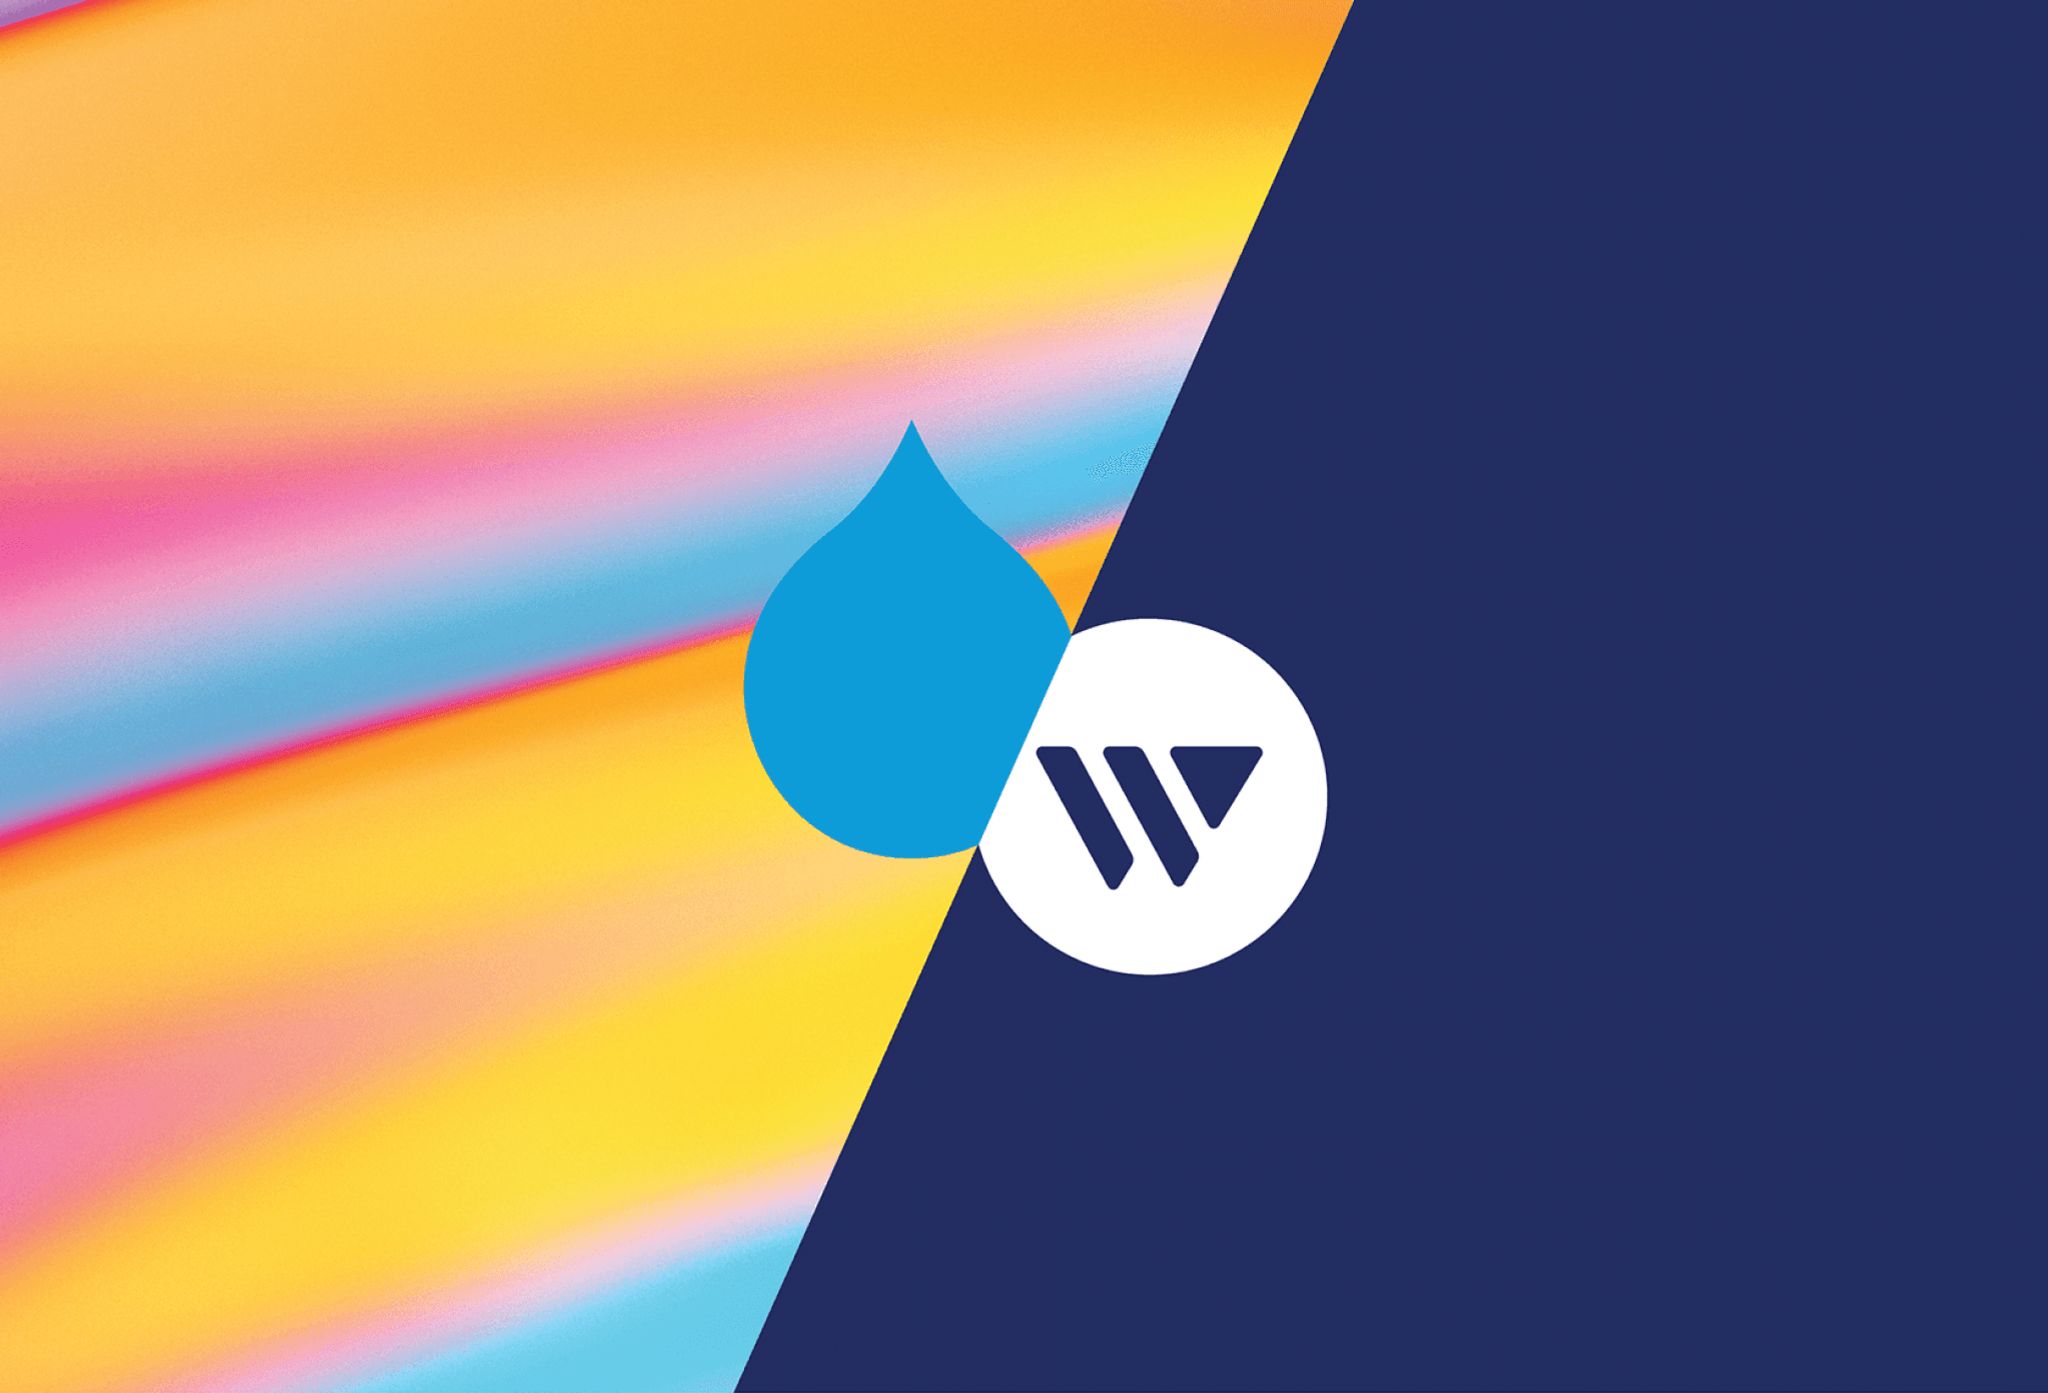 Acquia and Widen logos